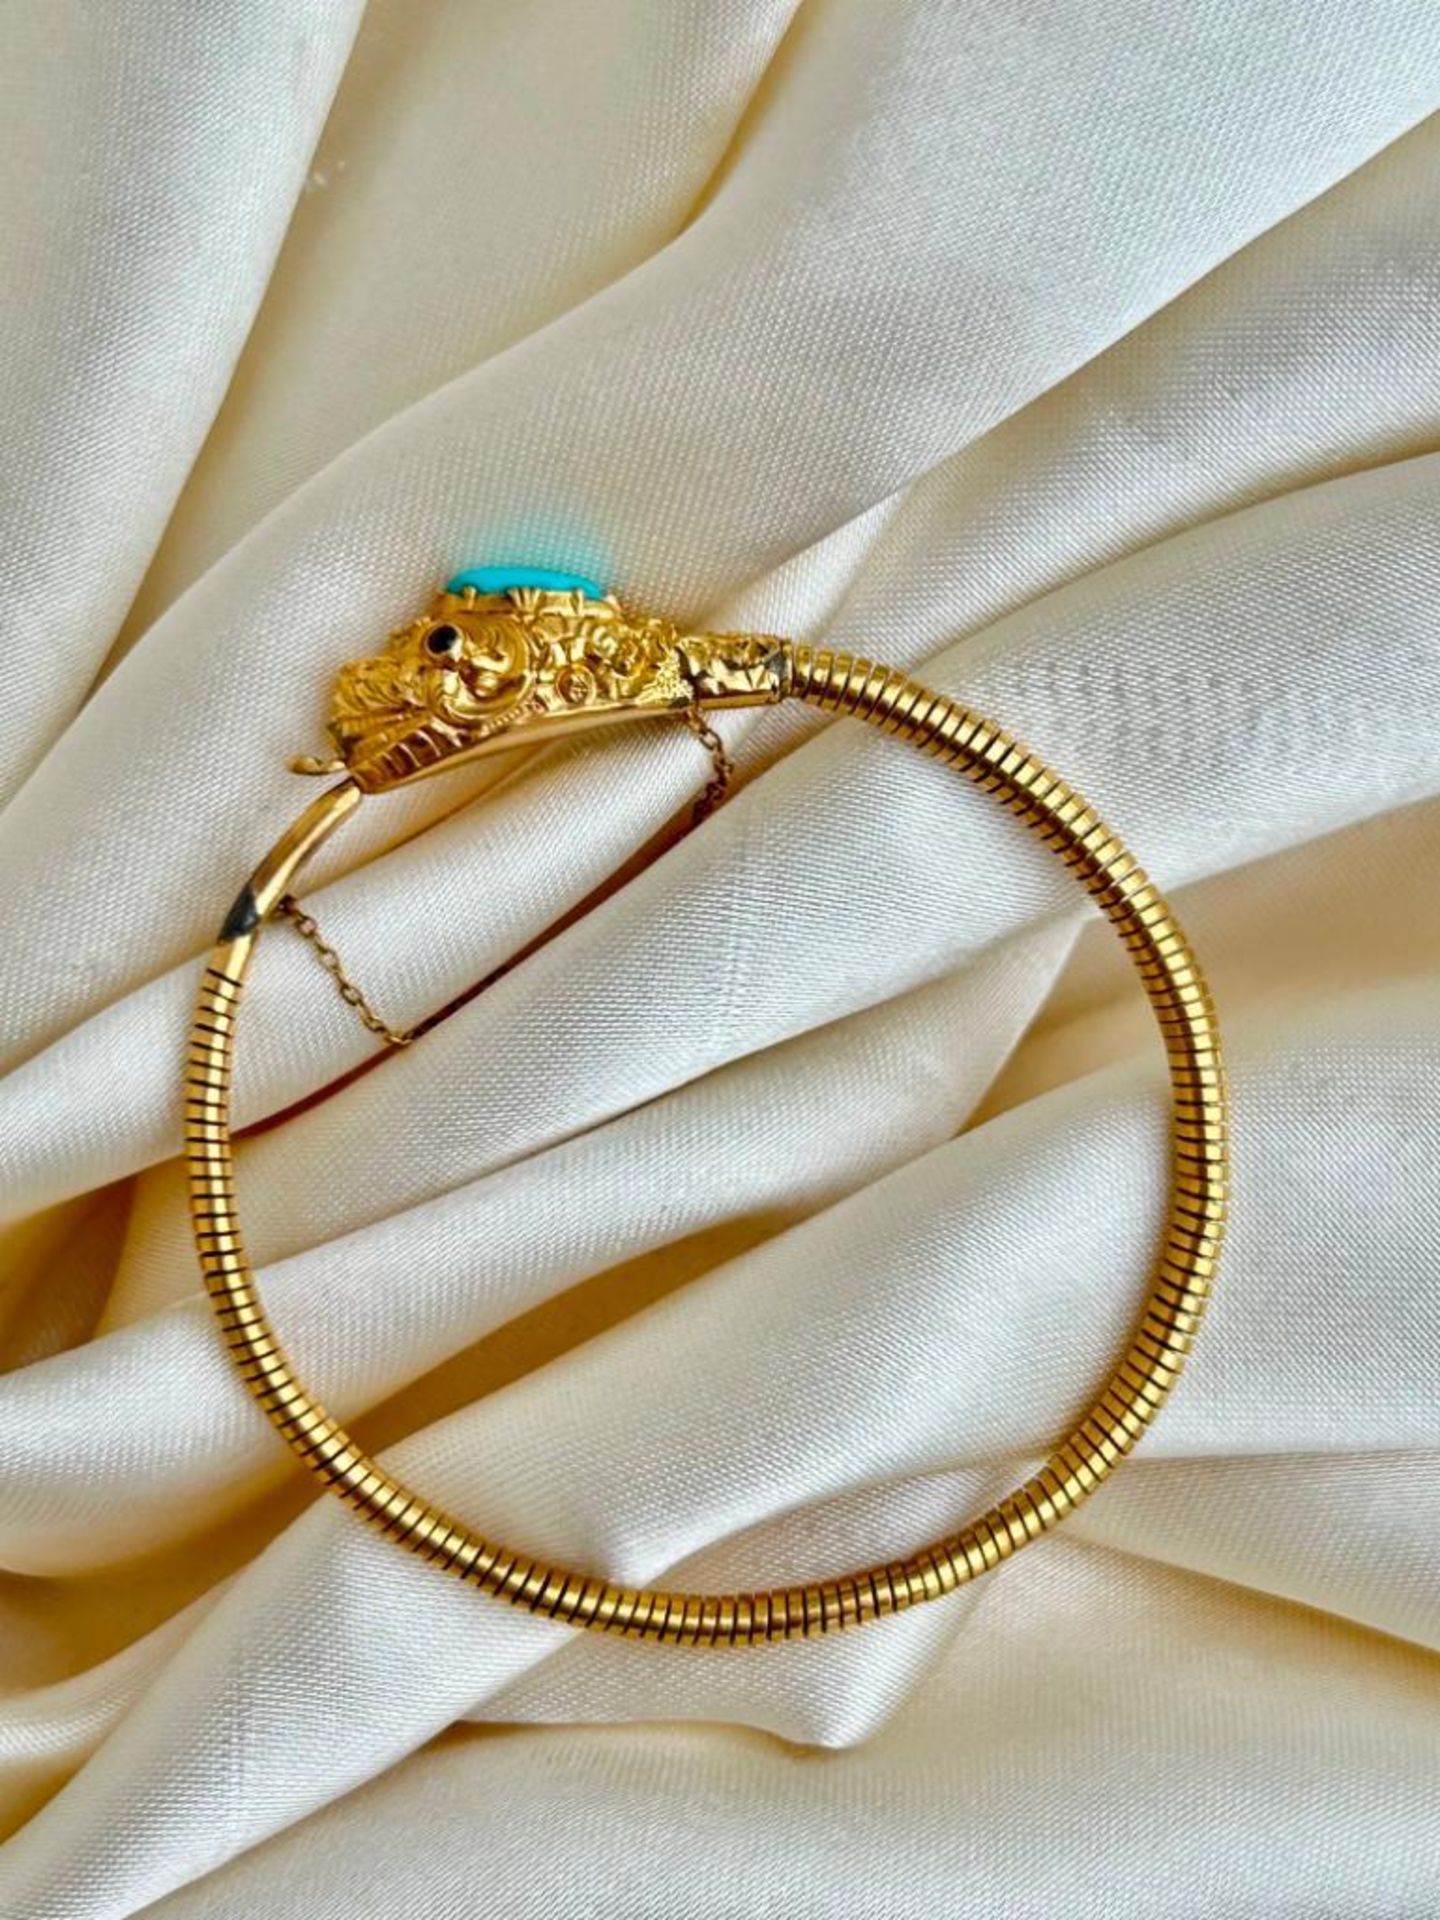 Antique 18ct Yellow Gold Snake Bangle with Turquoise Head in Box - Image 7 of 12